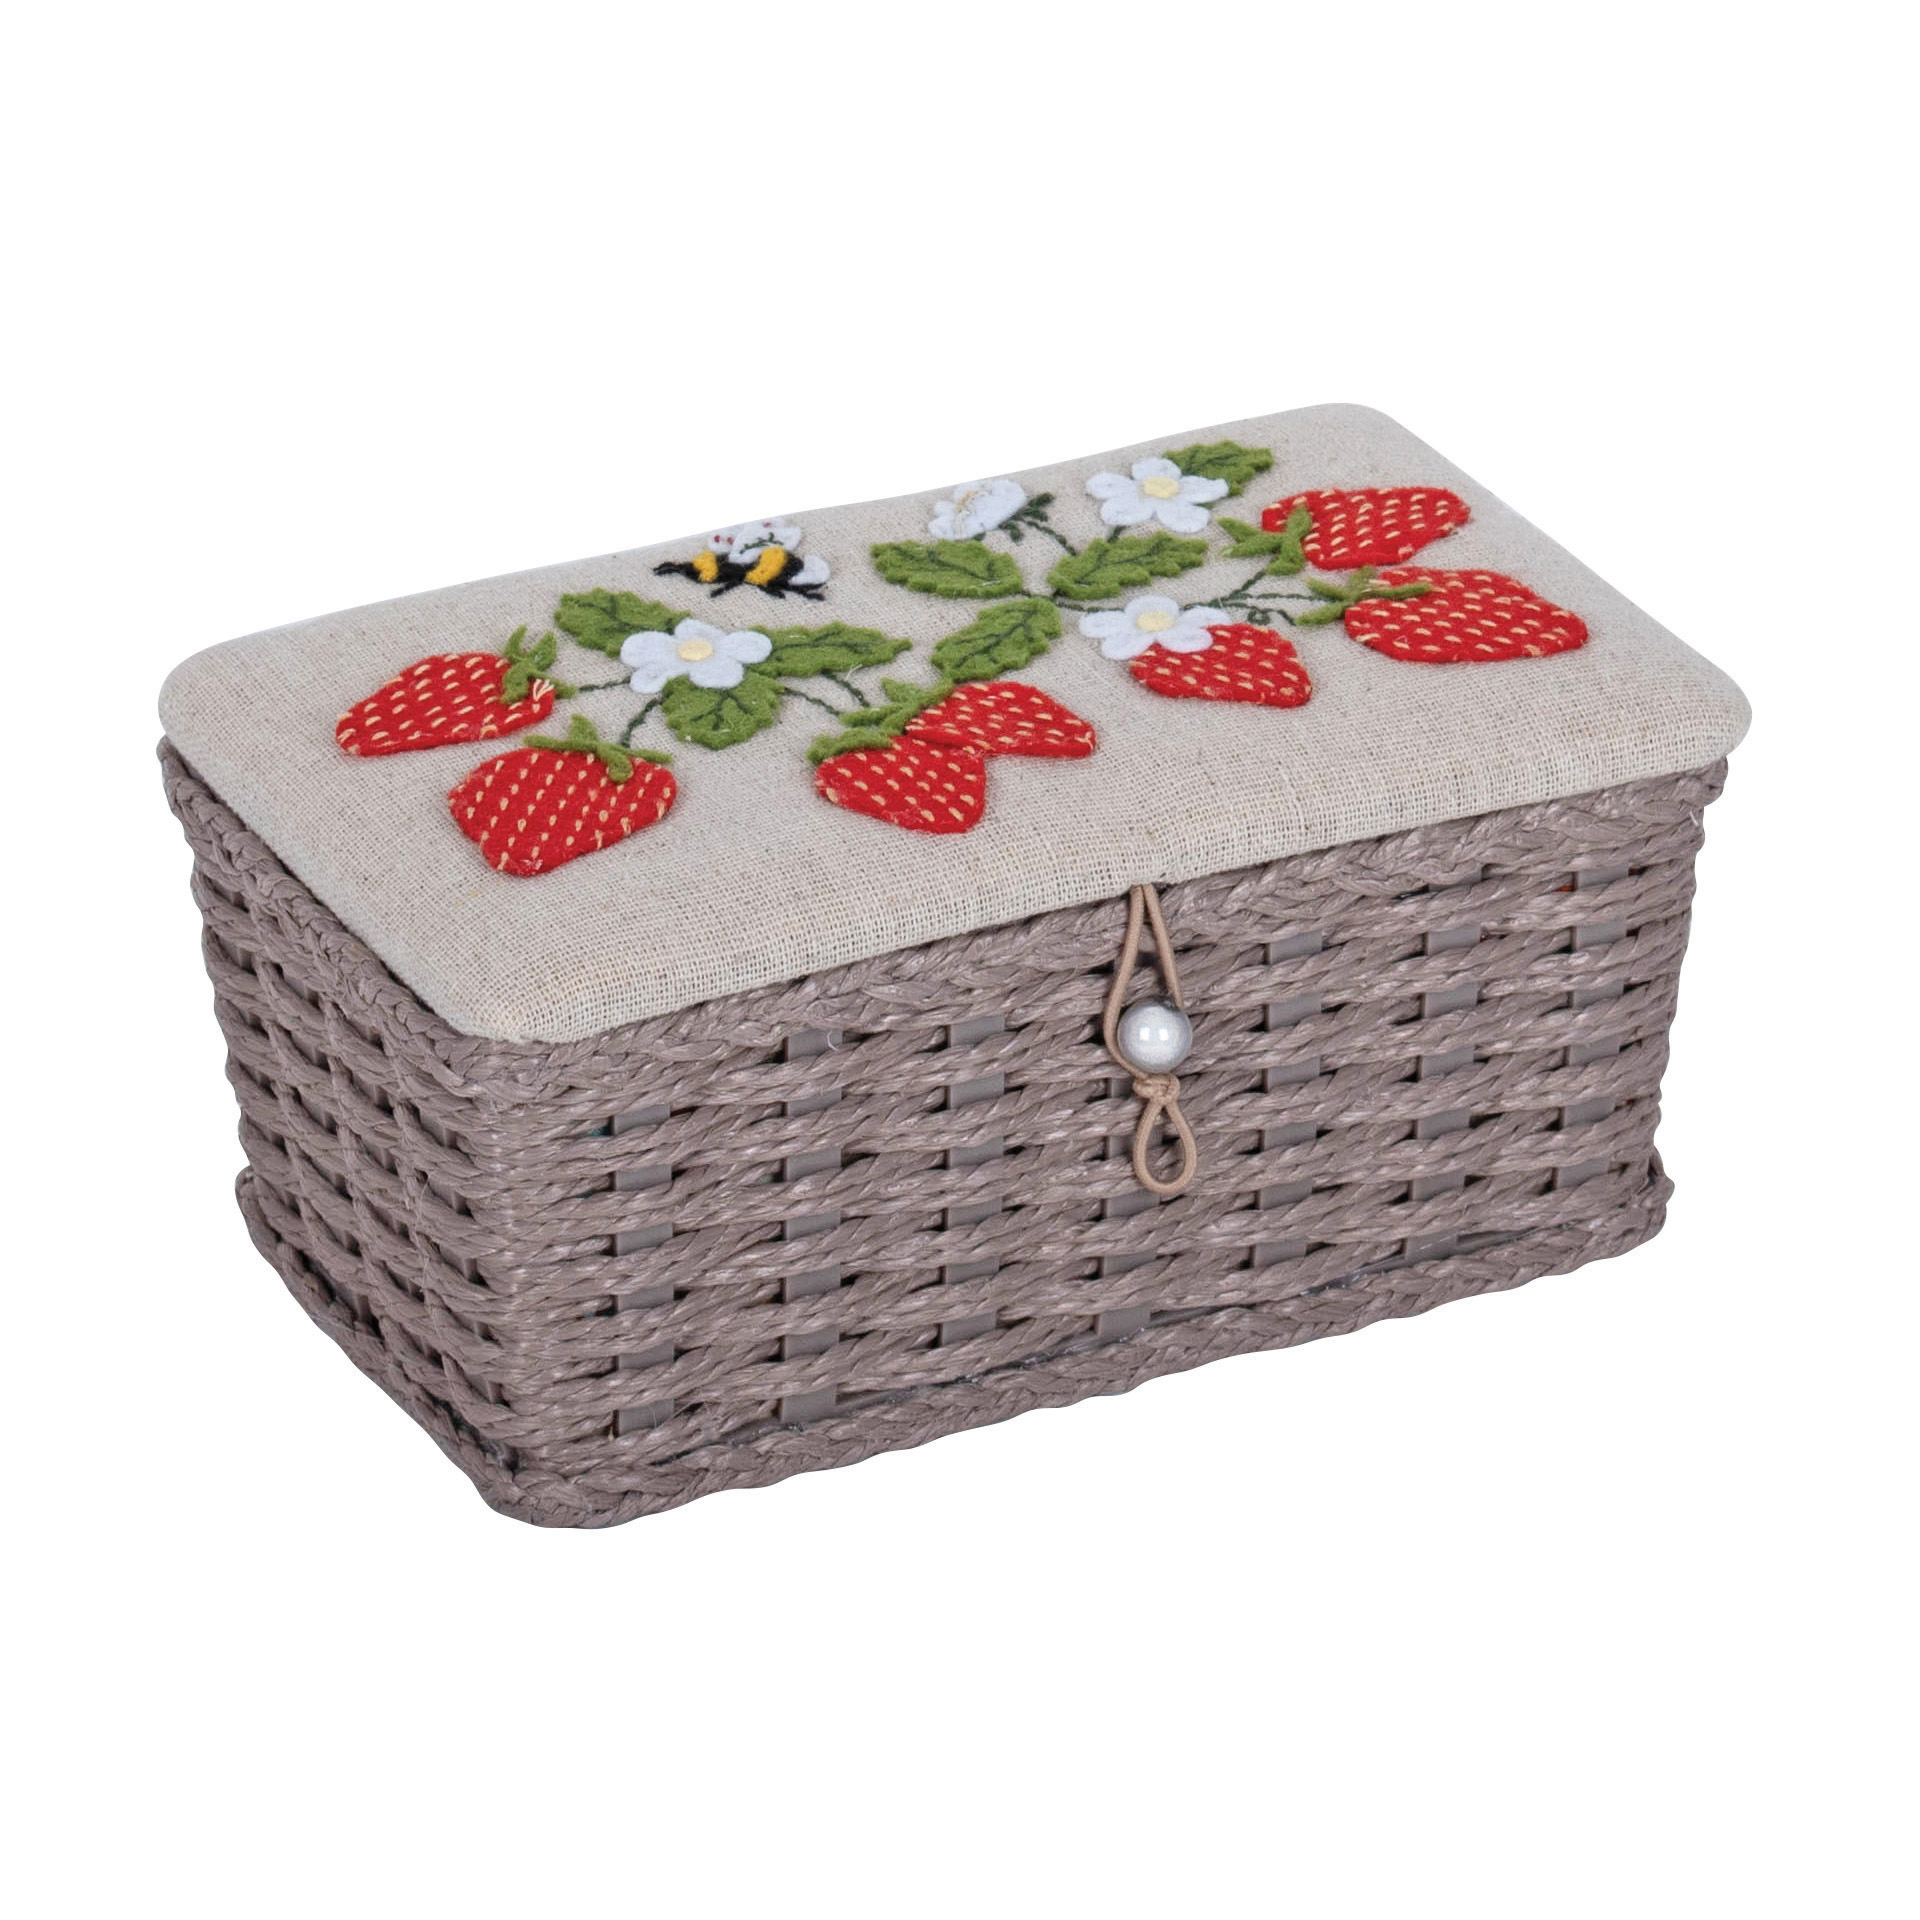 Wicker Sewing Box Appliqué Design: Natural Strawberries (small) product image